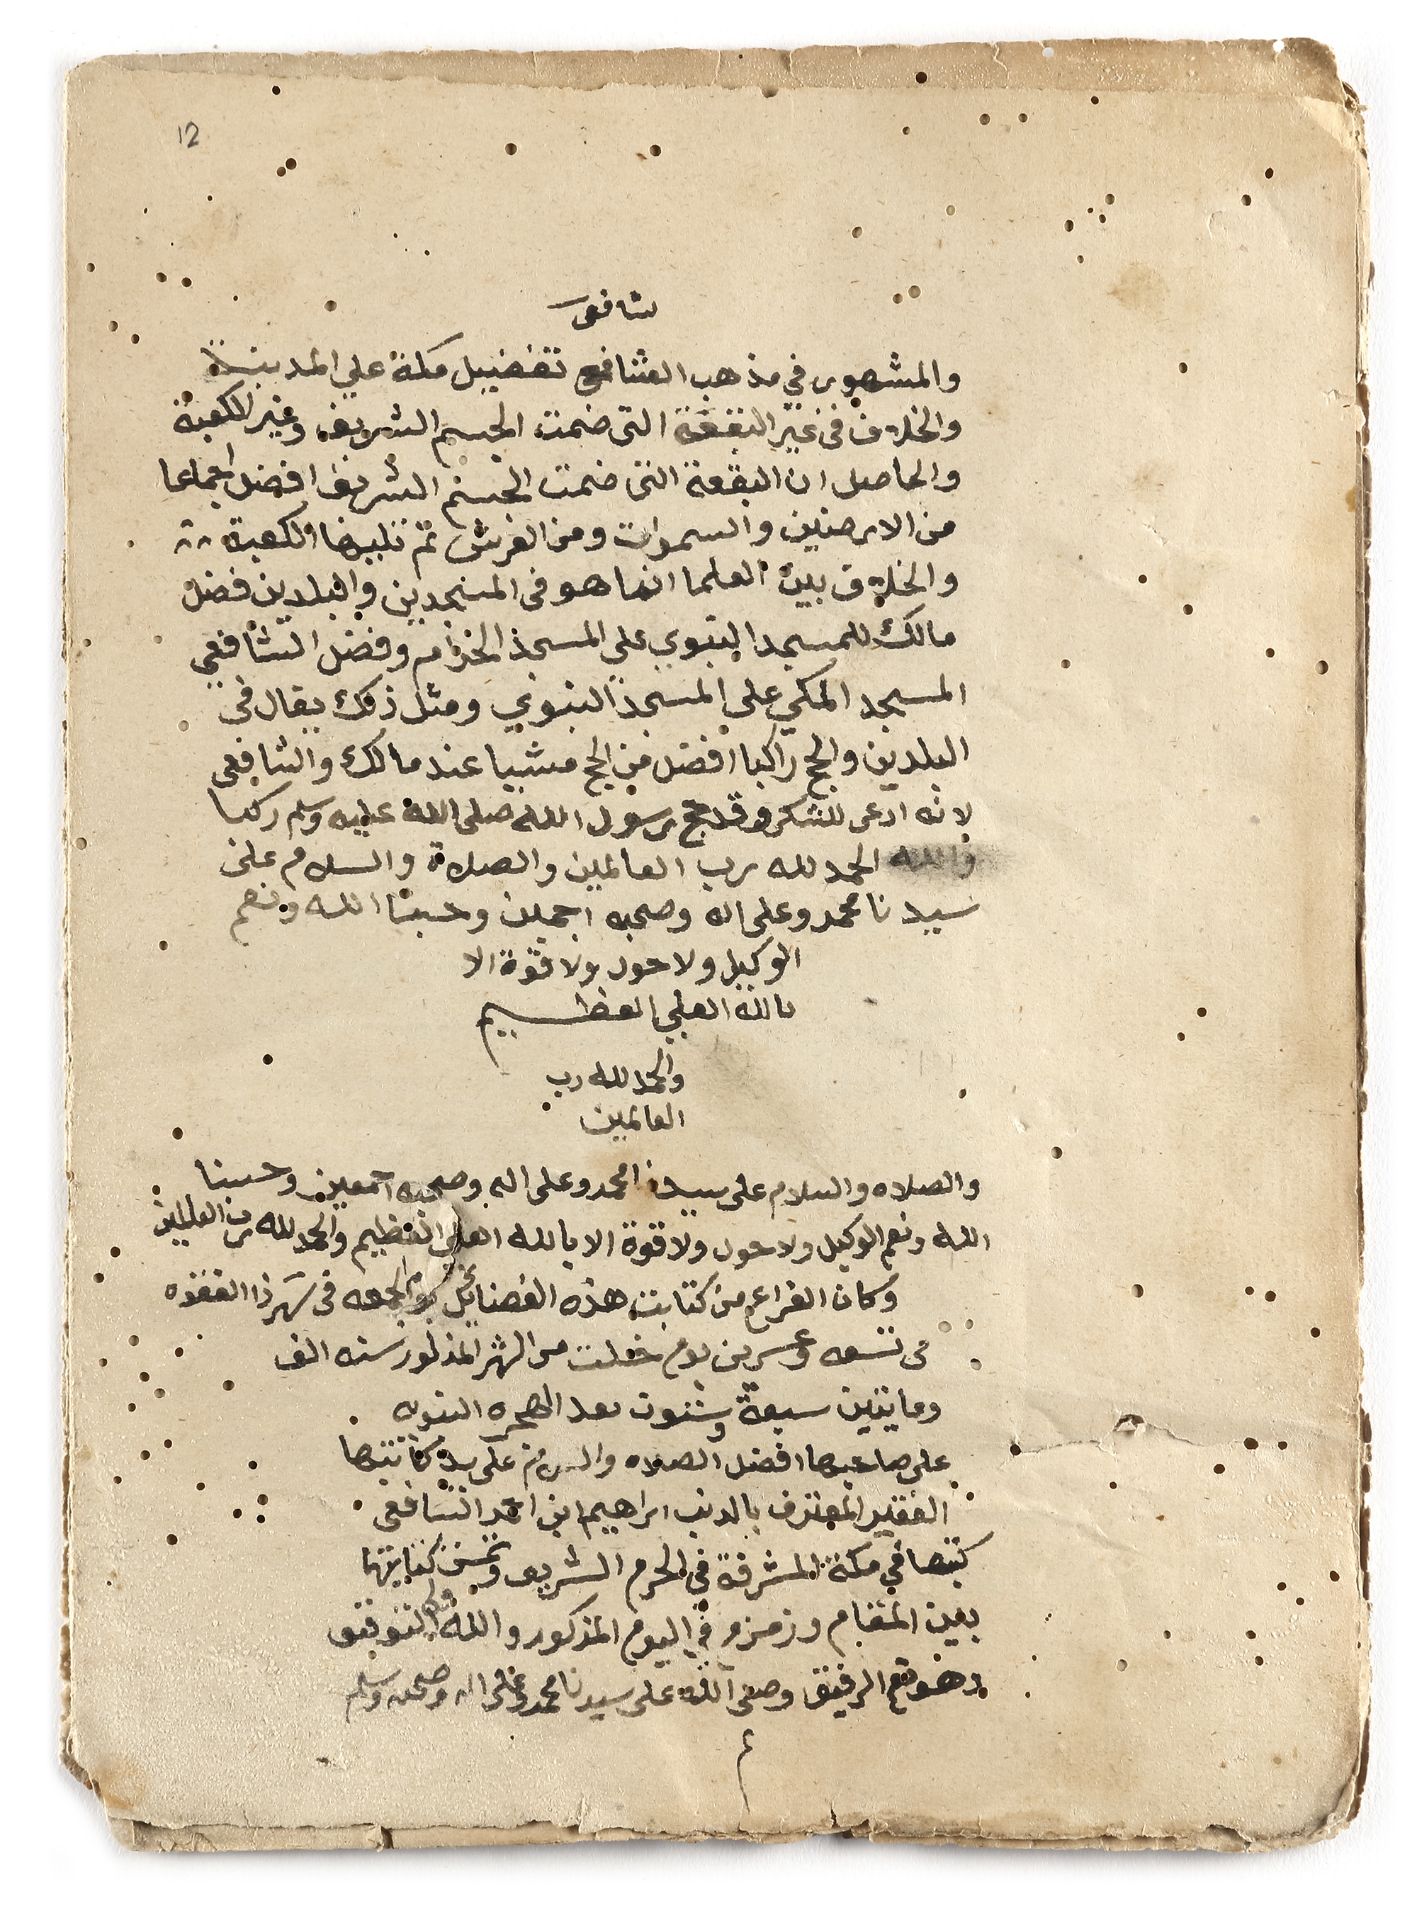 A CHAPTER ABOUT THE MERITS OF MECCA BY IBRAHIM IBN AHMED AL-SHAFI'I, IN MECCA AND DATED 1267 AH/1850 - Bild 4 aus 4